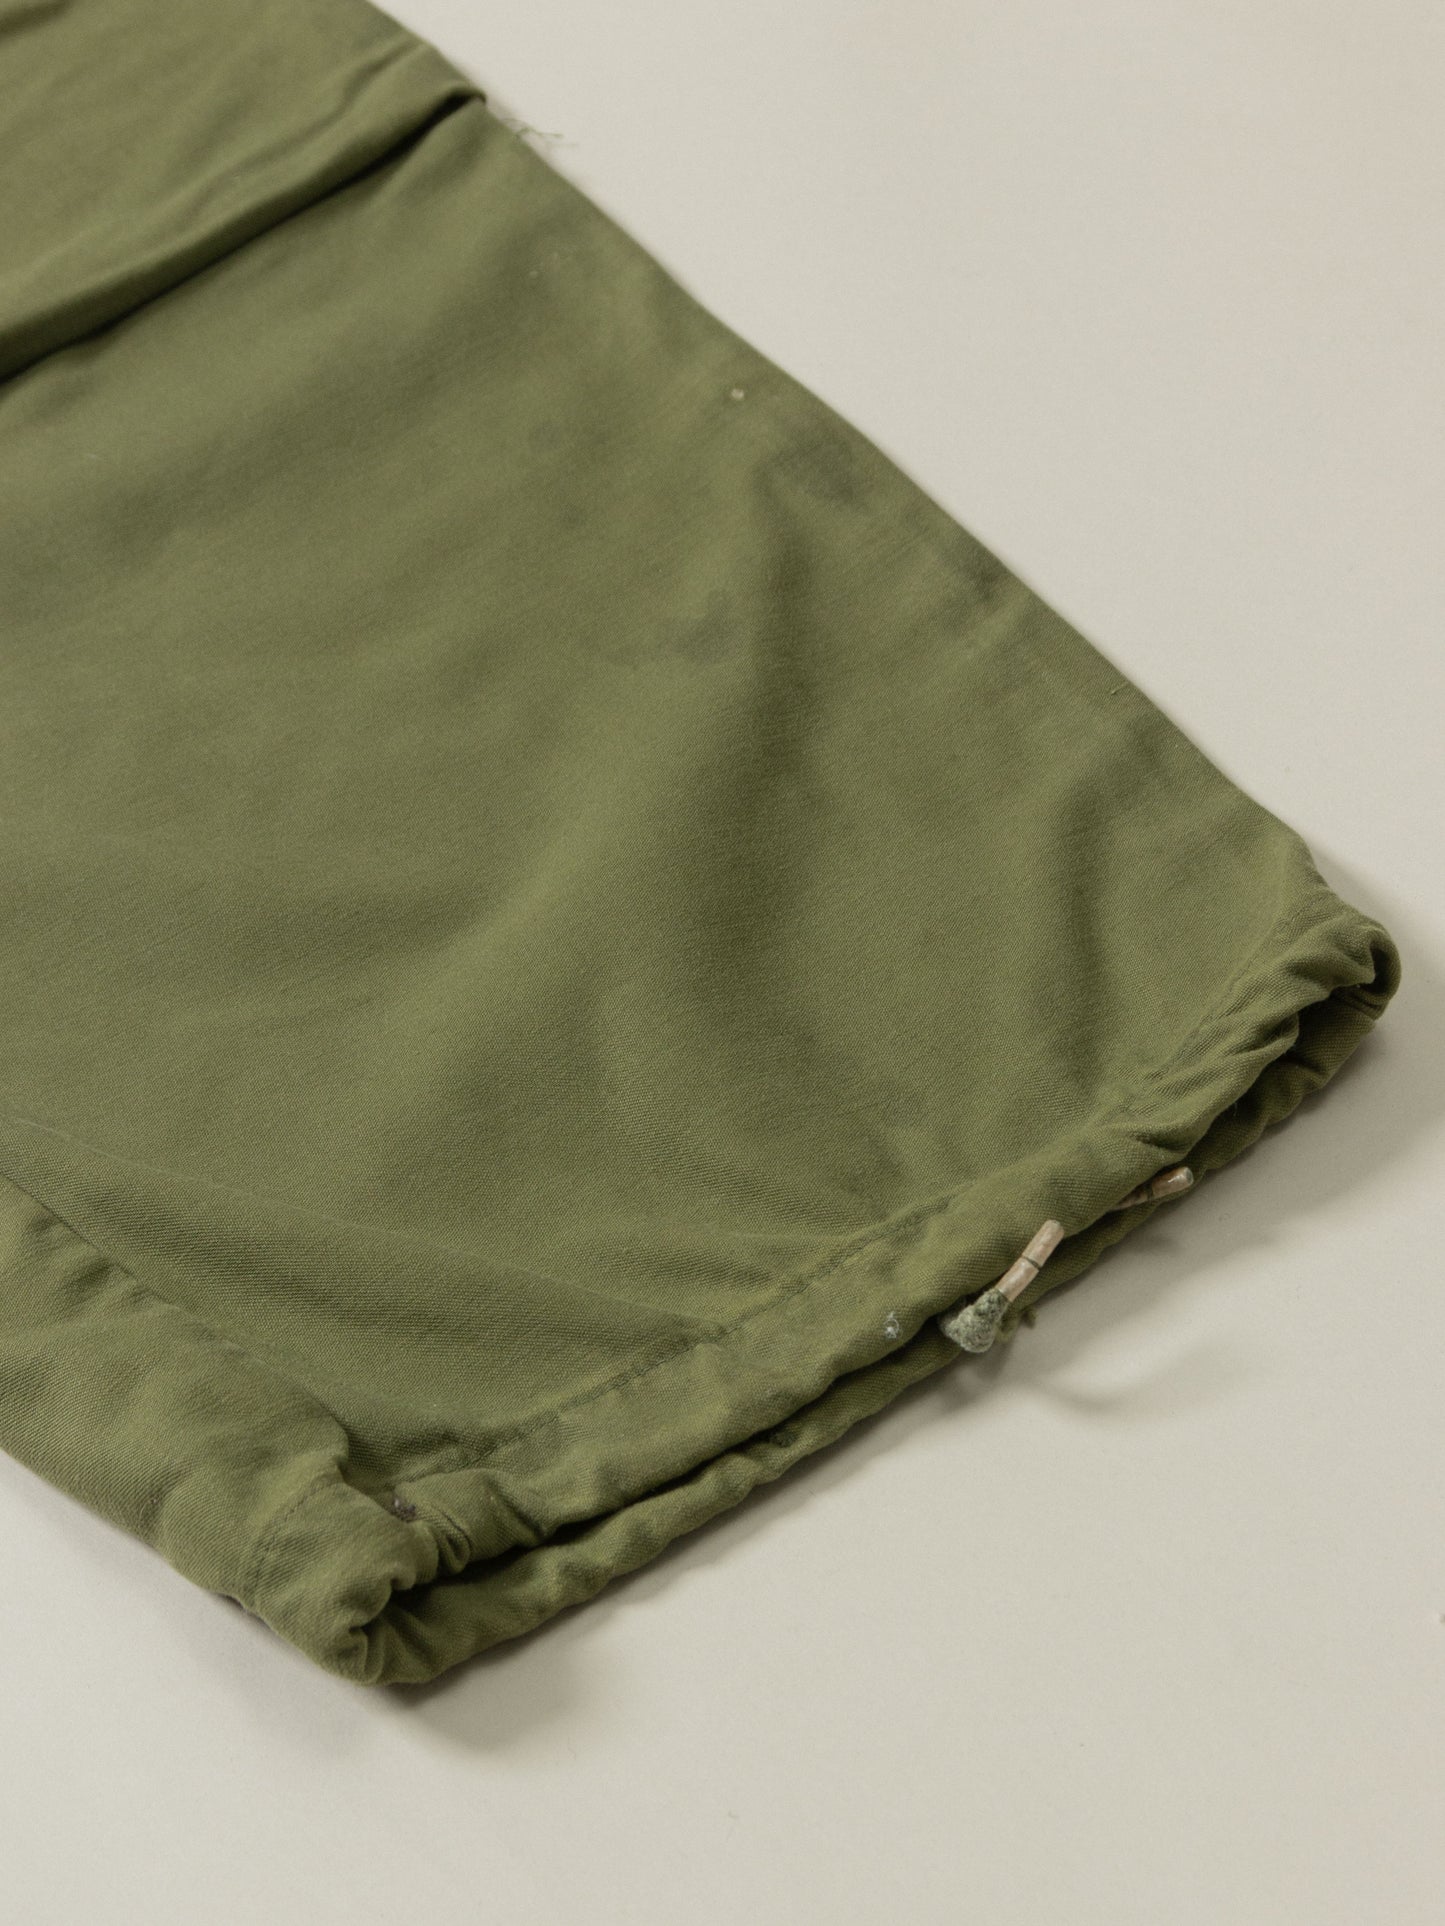 Vtg 1970s US Army M-65 Cargo Trousers (M-Reg)